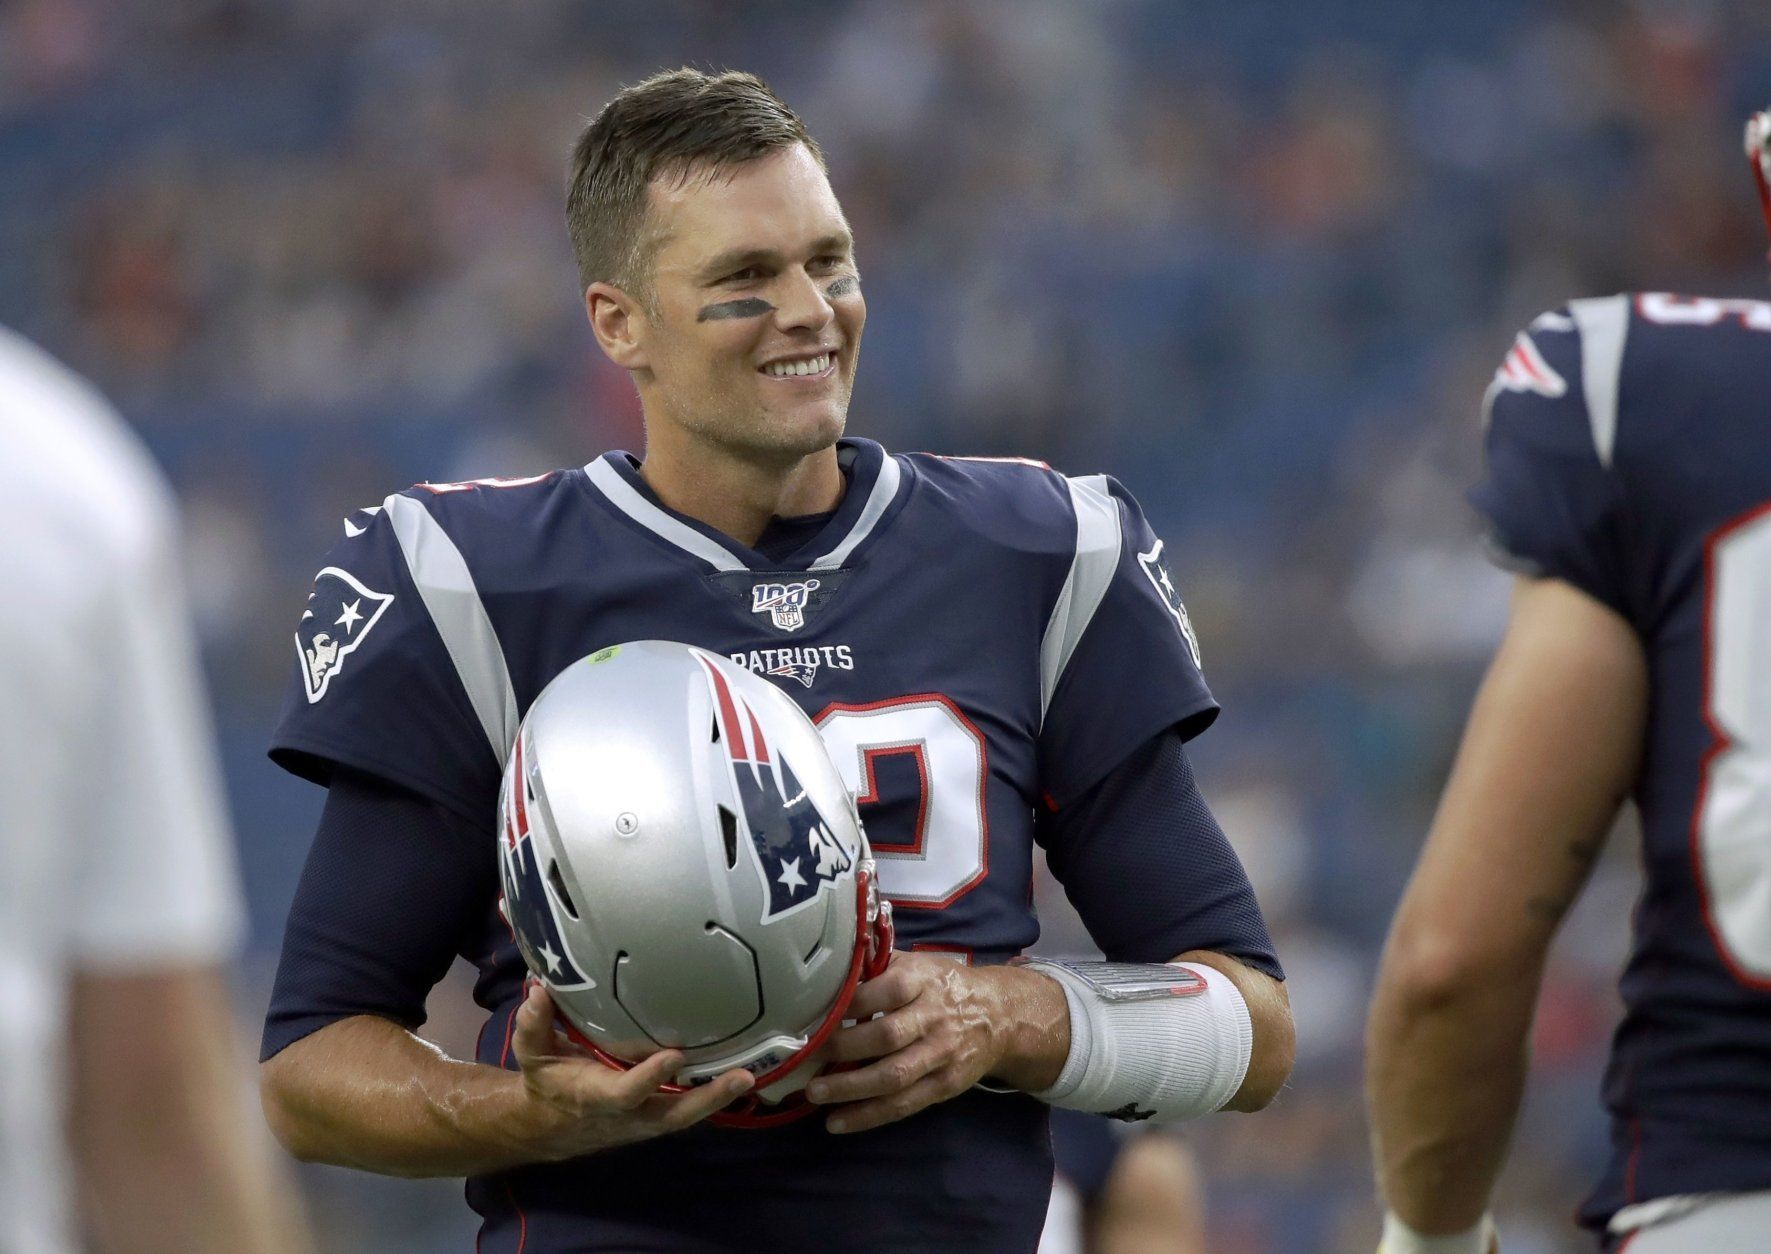 <p><b>C&#8217;mon, Tom Brady has to slow down <i>now</i>, right? <i>Right?!</i></b></p>
<p>Spoiler alert: This is the first question to every one of these sections until the GOAT finally hangs up his cleats.</p>
<p>Whether he plays particularly well or not, the 42-year-old Brady is <a href="https://profootballtalk.nbcsports.com/2019/05/12/at-age-42-even-a-mediocre-year-would-be-unprecedented-for-tom-brady/" target="_blank" rel="noopener noreferrer" data-saferedirecturl="https://www.google.com/url?q=https://profootballtalk.nbcsports.com/2019/05/12/at-age-42-even-a-mediocre-year-would-be-unprecedented-for-tom-brady/&amp;source=gmail&amp;ust=1567097099847000&amp;usg=AFQjCNGgw2RJZBqIgr1_grdo4Hc7LN_oFQ">making history just by being in New England&#8217;s starting lineup</a>. He&#8217;s in <a href="https://profootballtalk.nbcsports.com/2019/07/05/video-shows-tom-brady-running-faster-now-than-at-the-combine/" target="_blank" rel="noopener noreferrer" data-saferedirecturl="https://www.google.com/url?q=https://profootballtalk.nbcsports.com/2019/07/05/video-shows-tom-brady-running-faster-now-than-at-the-combine/&amp;source=gmail&amp;ust=1567097099847000&amp;usg=AFQjCNGyJRFPk30GKD1DscSDHOzKAz_-Pg">the best shape of his life</a> and hasn&#8217;t shown signs of slowing down. But Father Time is undefeated, and sometimes visits his victims in-season (remember Peyton Manning&#8217;s precipitous decline?) so Brady&#8217;s not really in the clear unless and until he&#8217;s clutching yet another Super Bowl MVP trophy at season&#8217;s end.</p>
